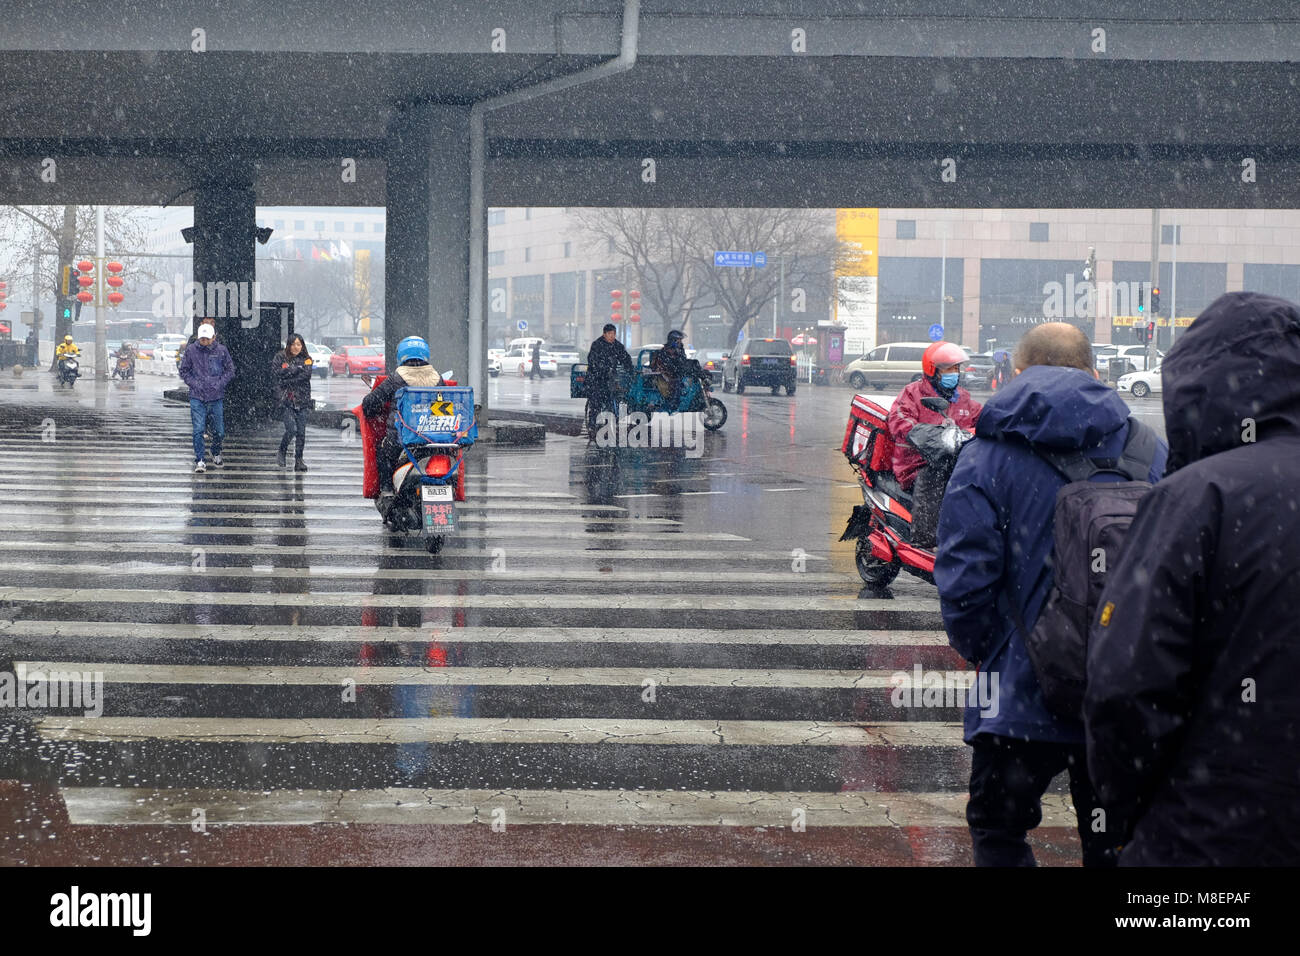 Beijing, China, March 17, 2018. Rare Snowy Day in Chaoyang District Beijing, China. People crossing a street on a snowy day. Credit: Steven Liveoak/Alamy Live News Stock Photo